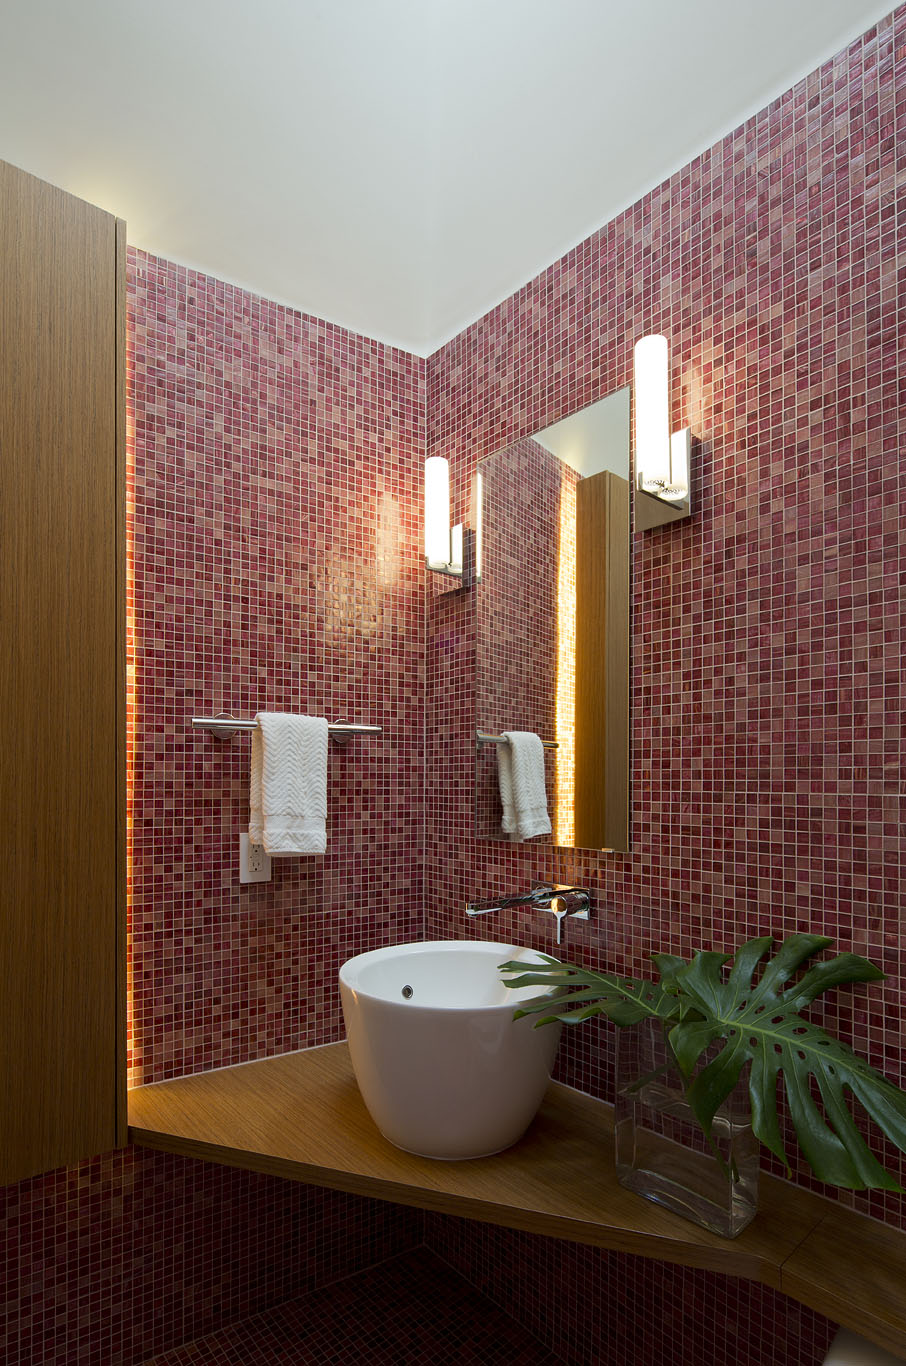 Powder bath welcomes guests with mosaic tile and floating vanity.